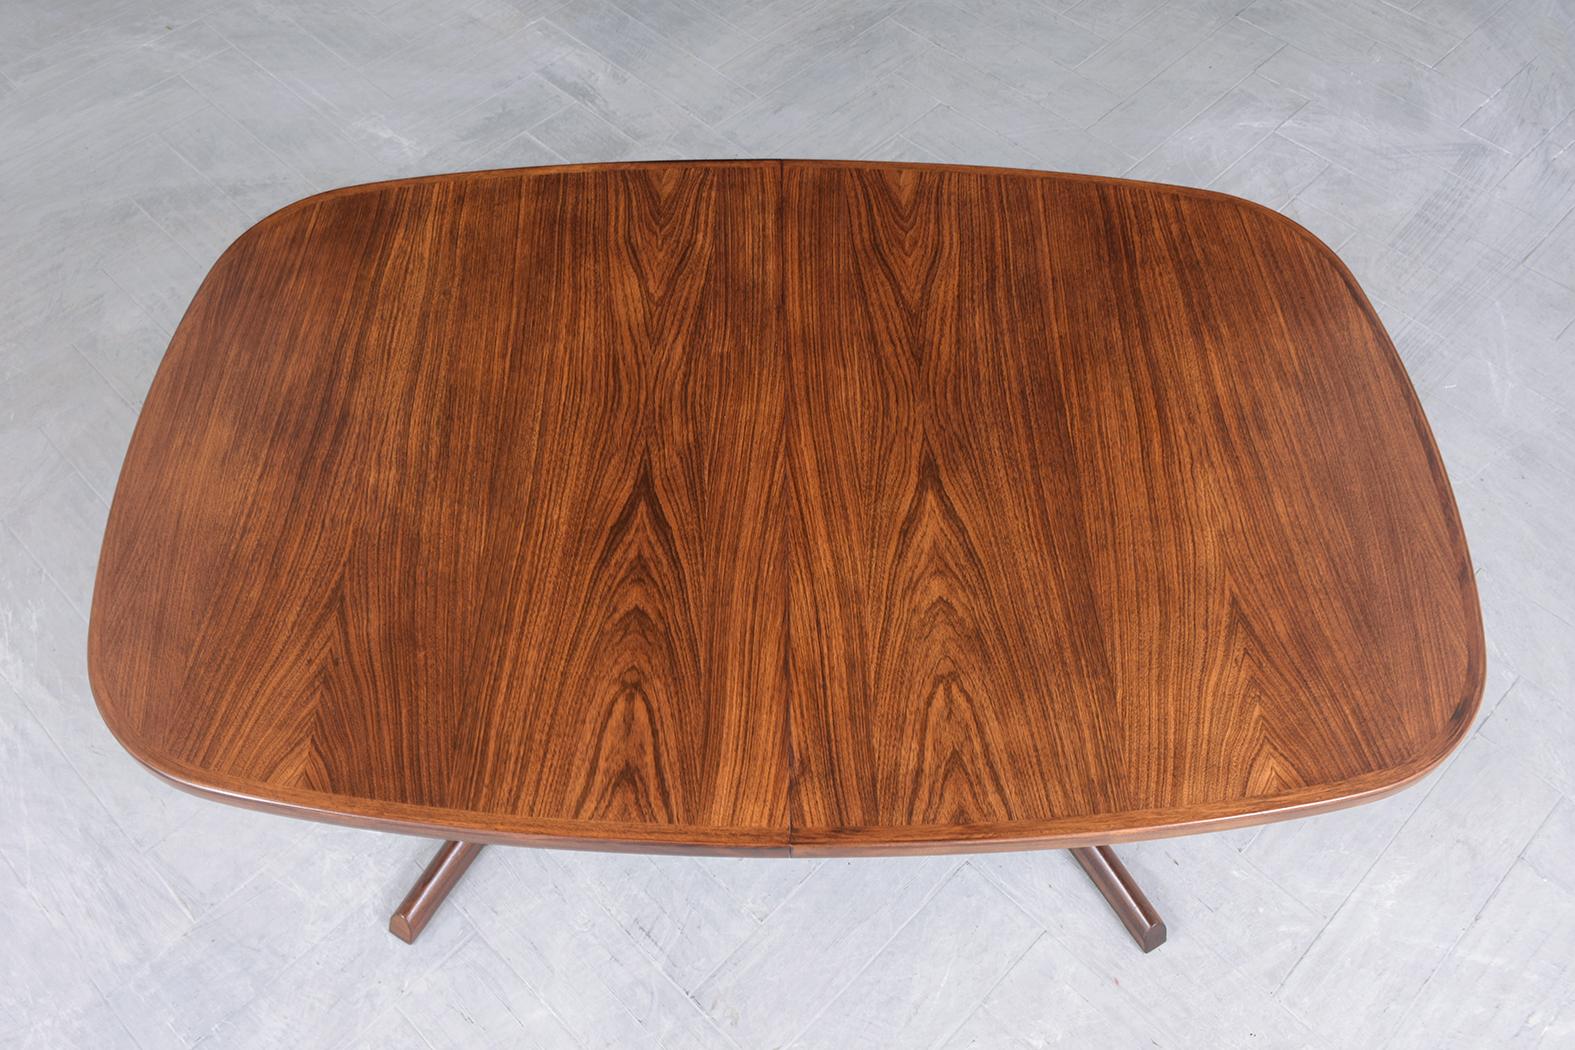 Carved Danish Modern Rosewood Extendable Dining Table